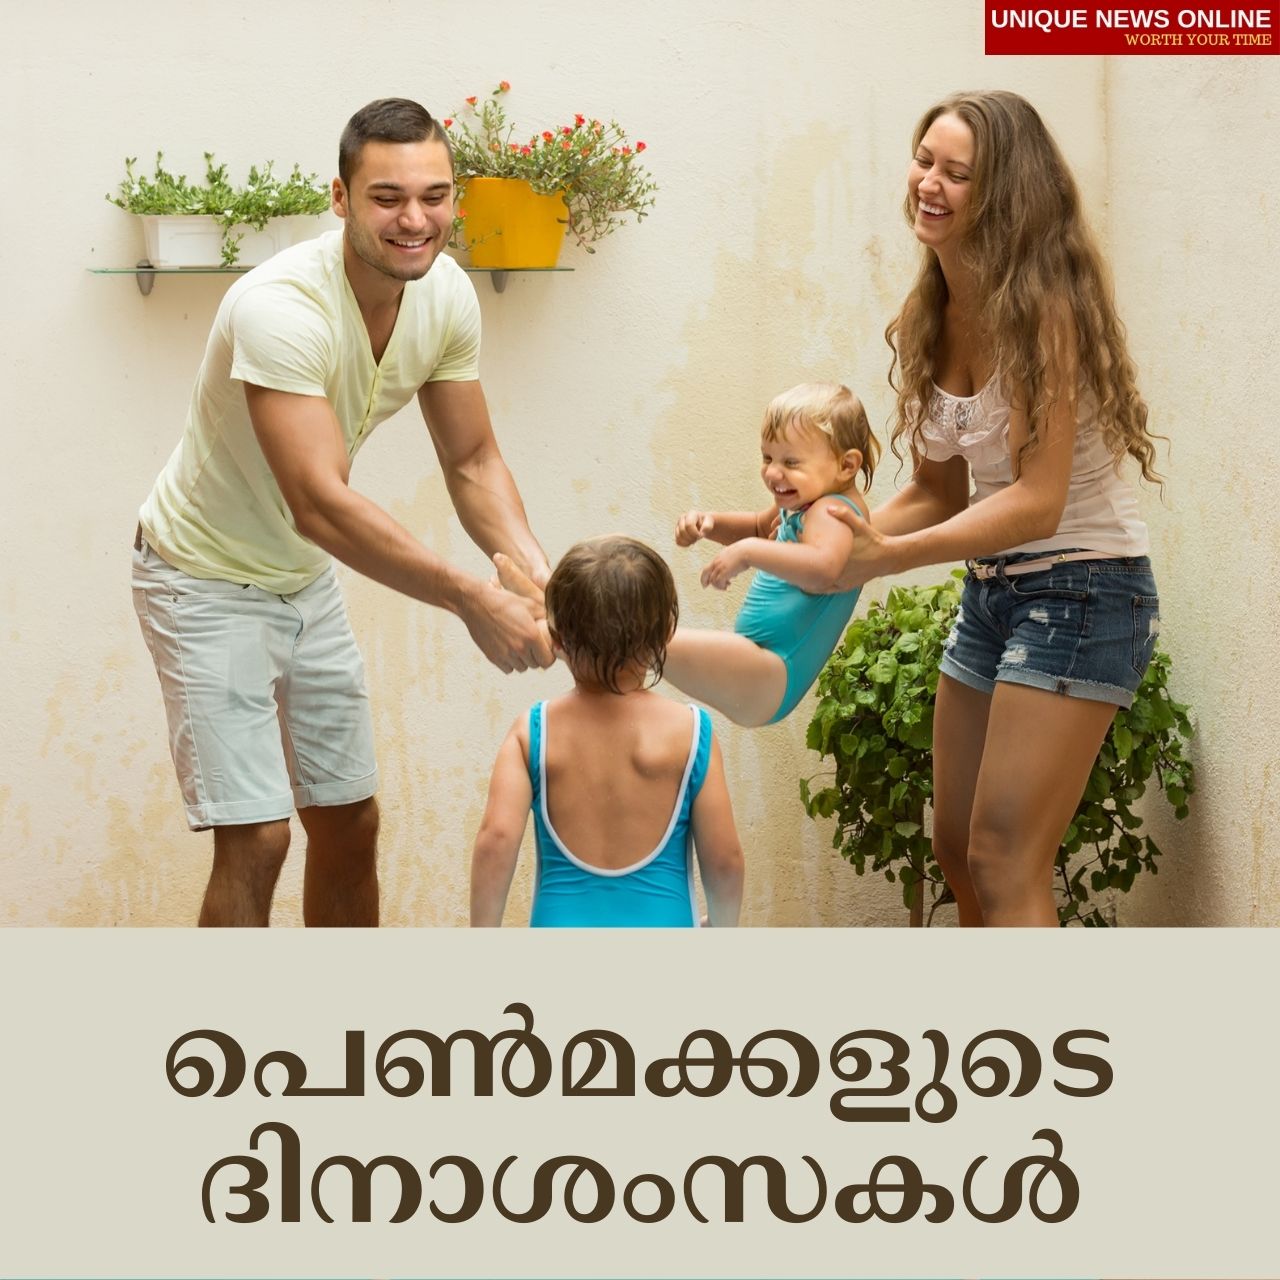 Happy Daughters Day 2021 Malayalam Wishes, Greetings, Messages, Shayari, Quotes, and HD Images to Share